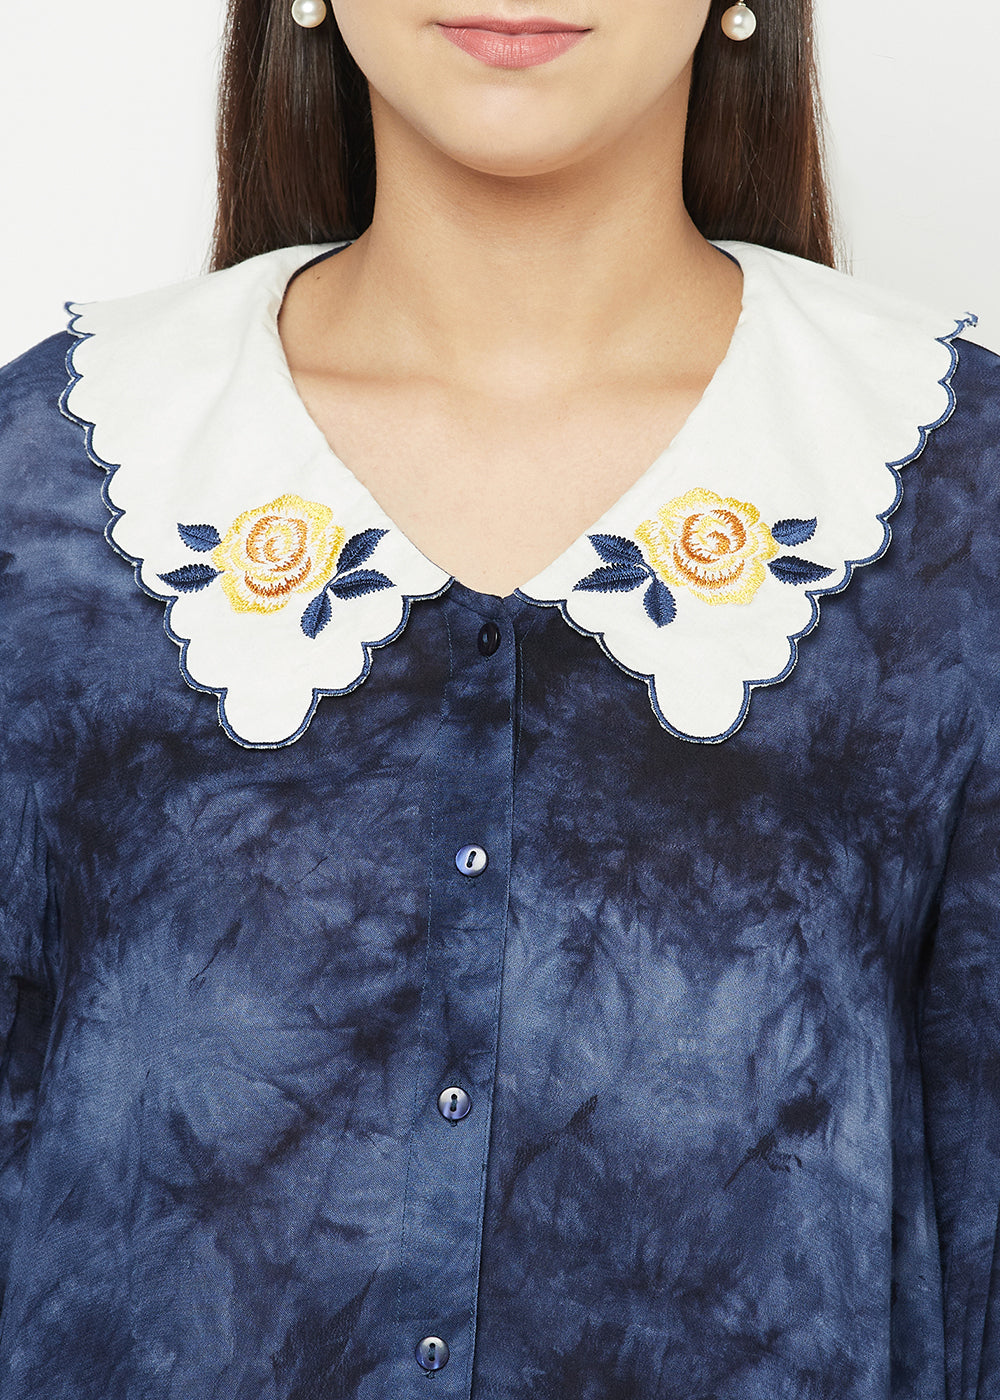 Embroidered Collar Tie-Dye Tunic